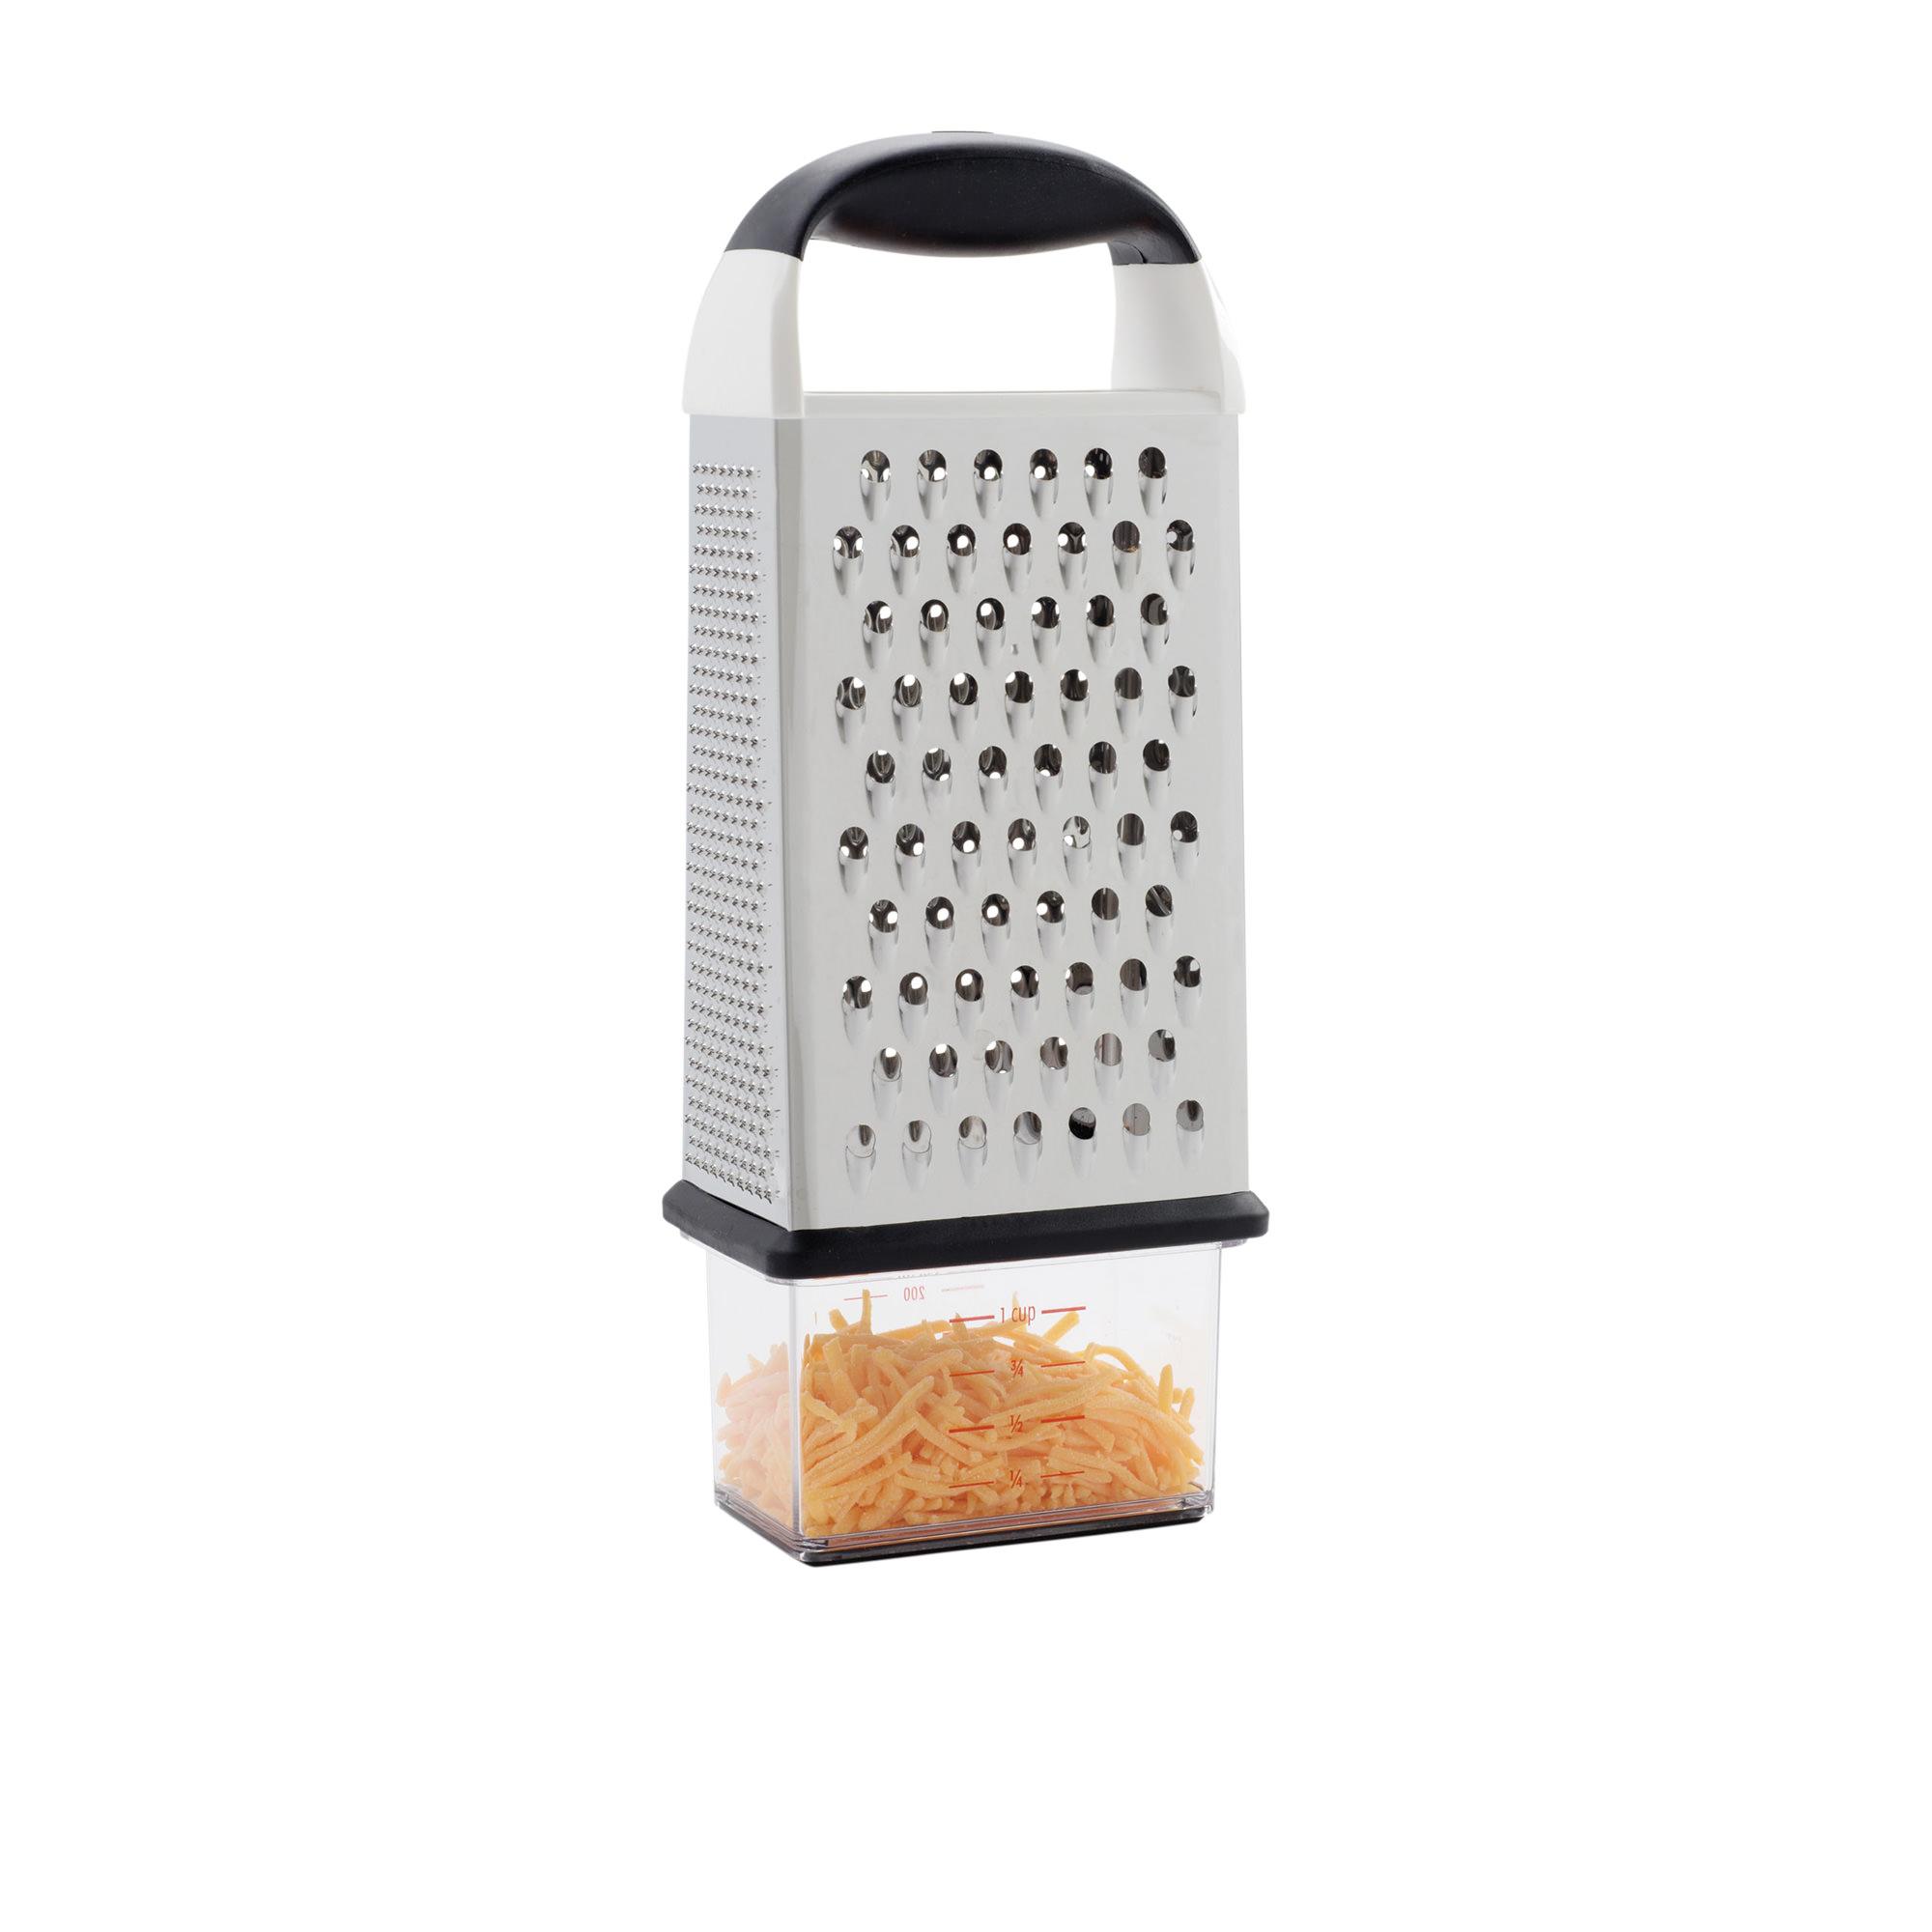 OXO Good Grips Box Grater Image 4